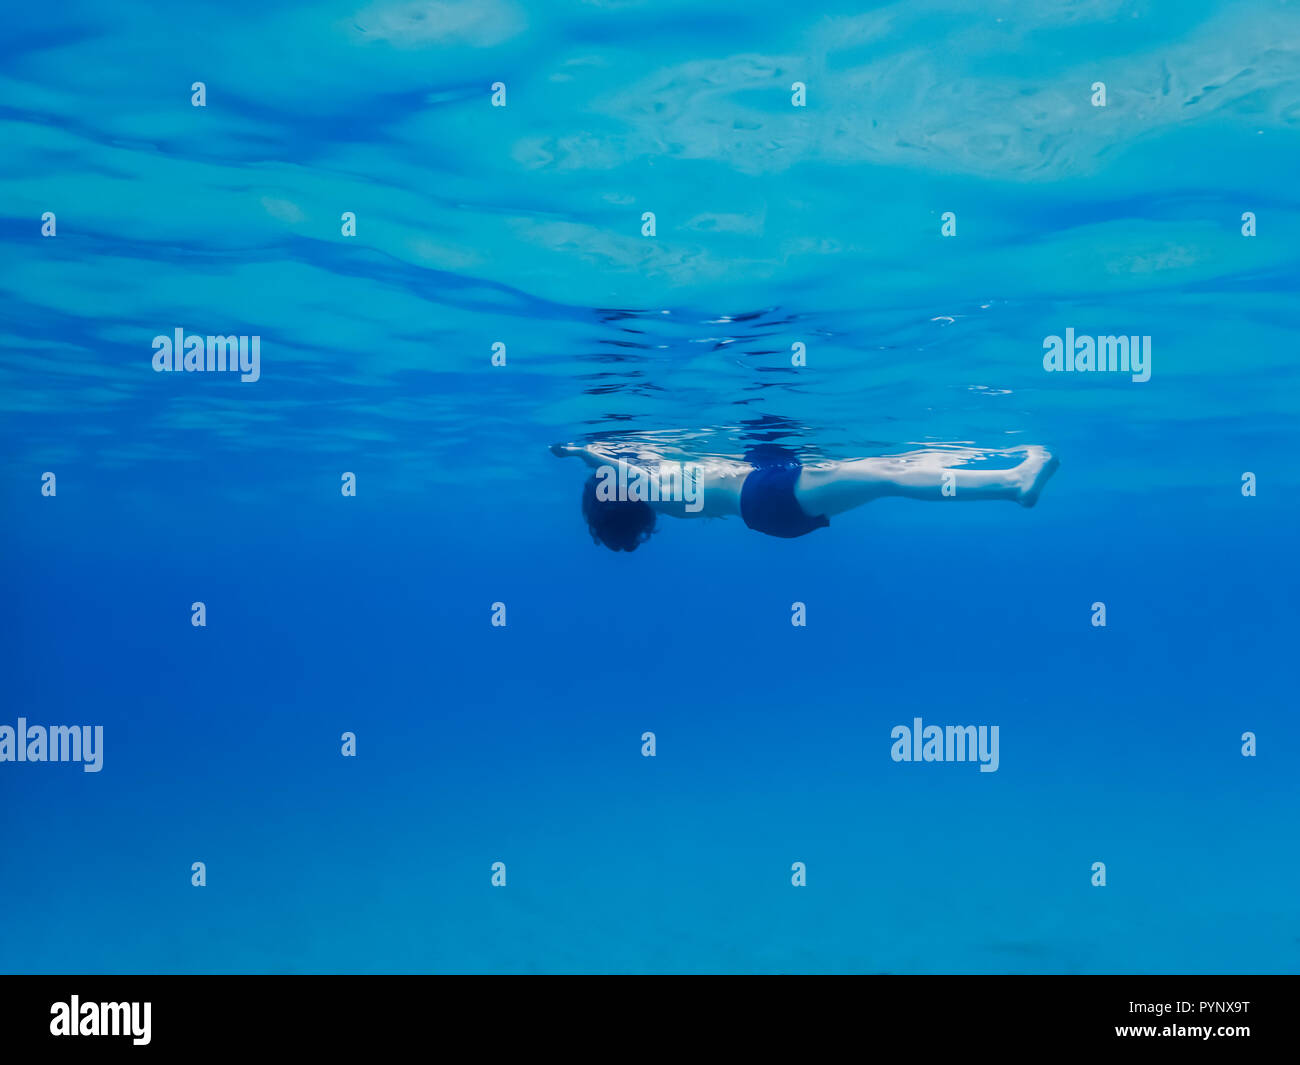 Woman floating on surface of blue ocean taken from side angle underwater perspective Stock Photo